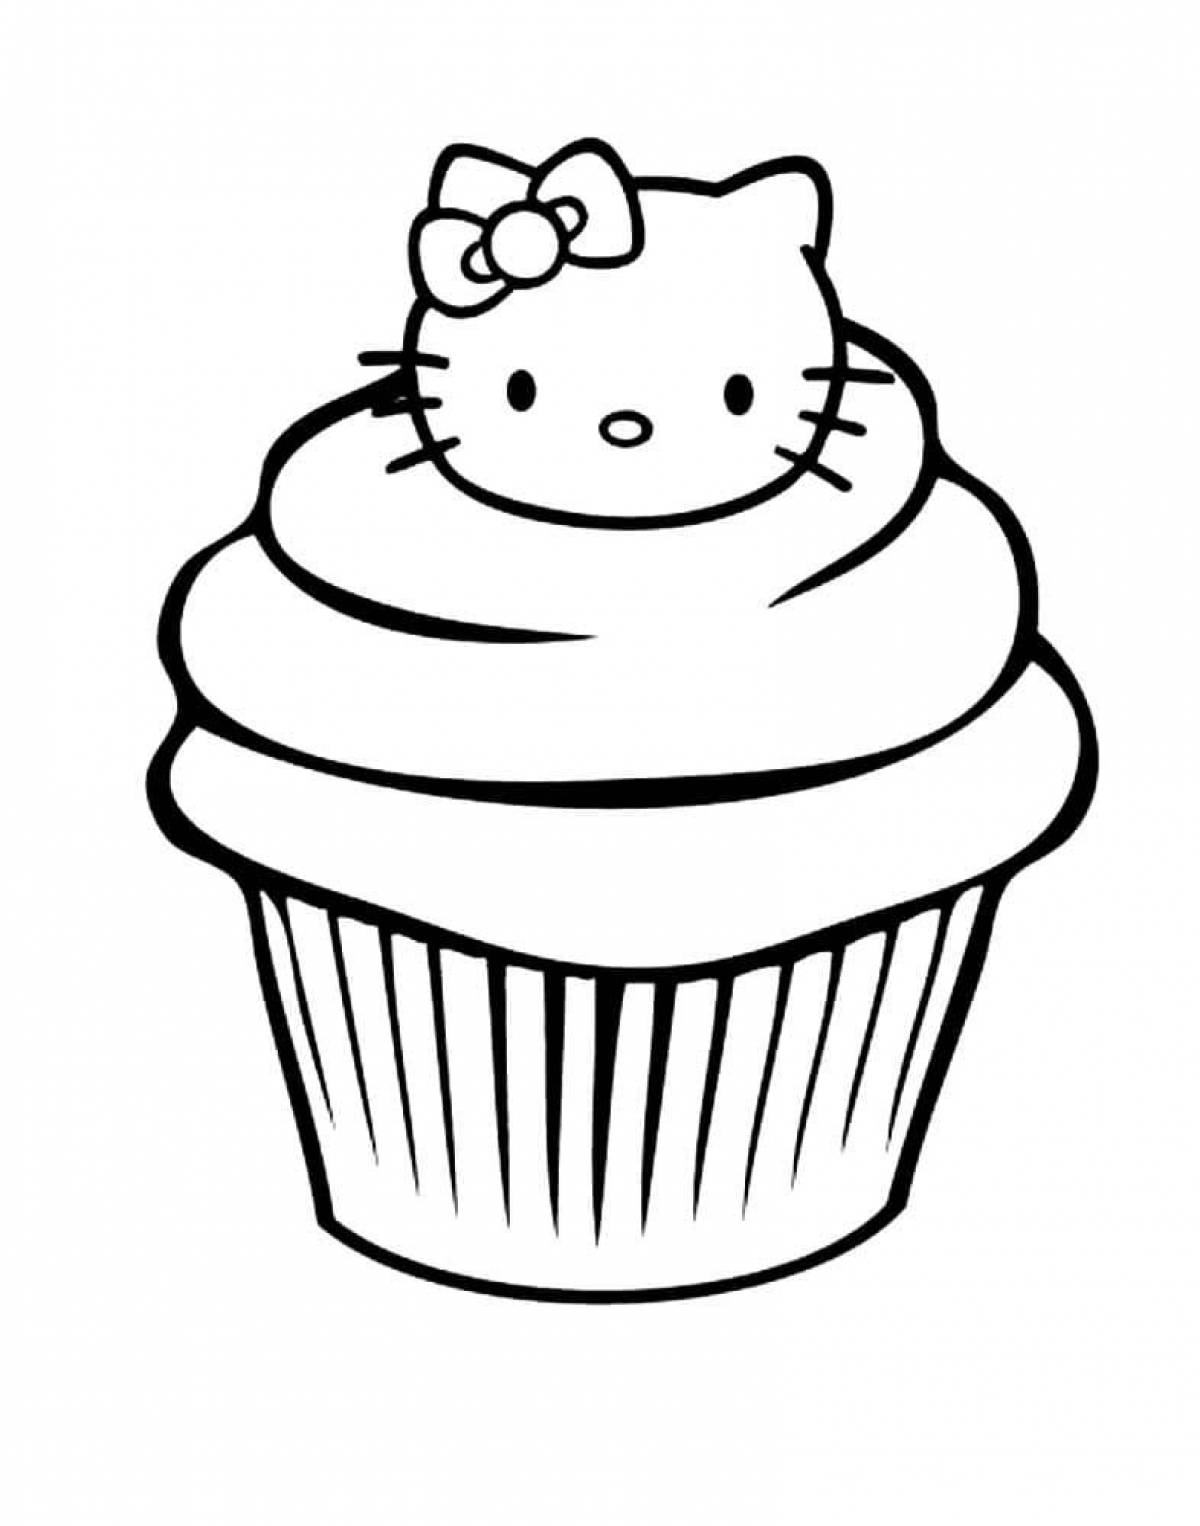 Exciting cupcake coloring page